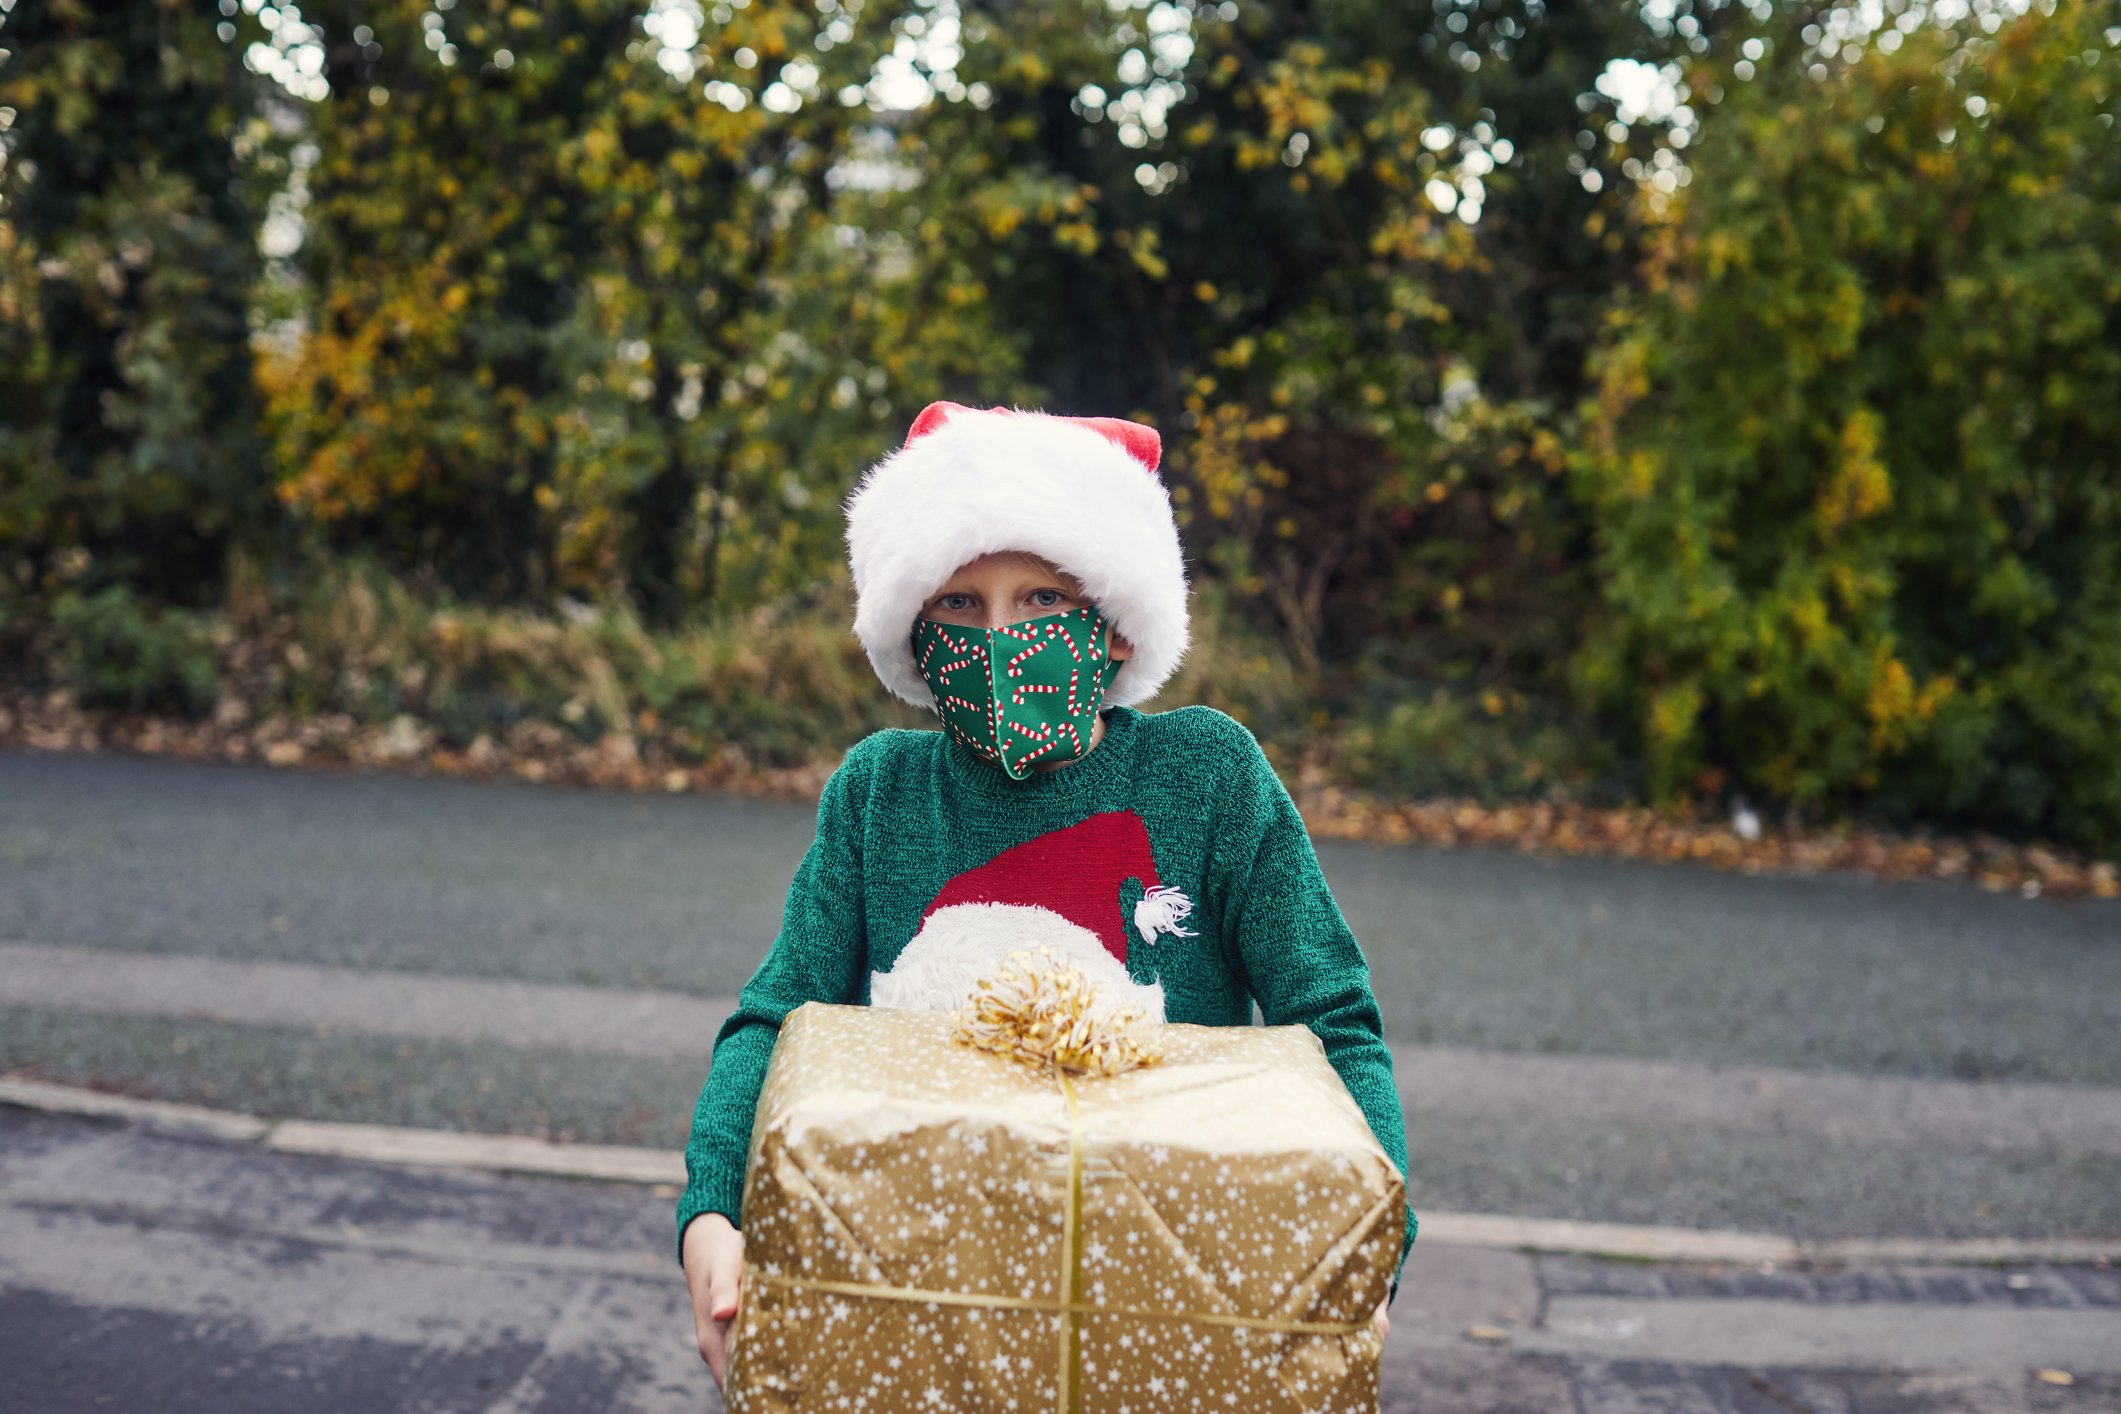 A boy on a Christmas hat and a facemask holding a Christmas present. | Photo: Getty Images